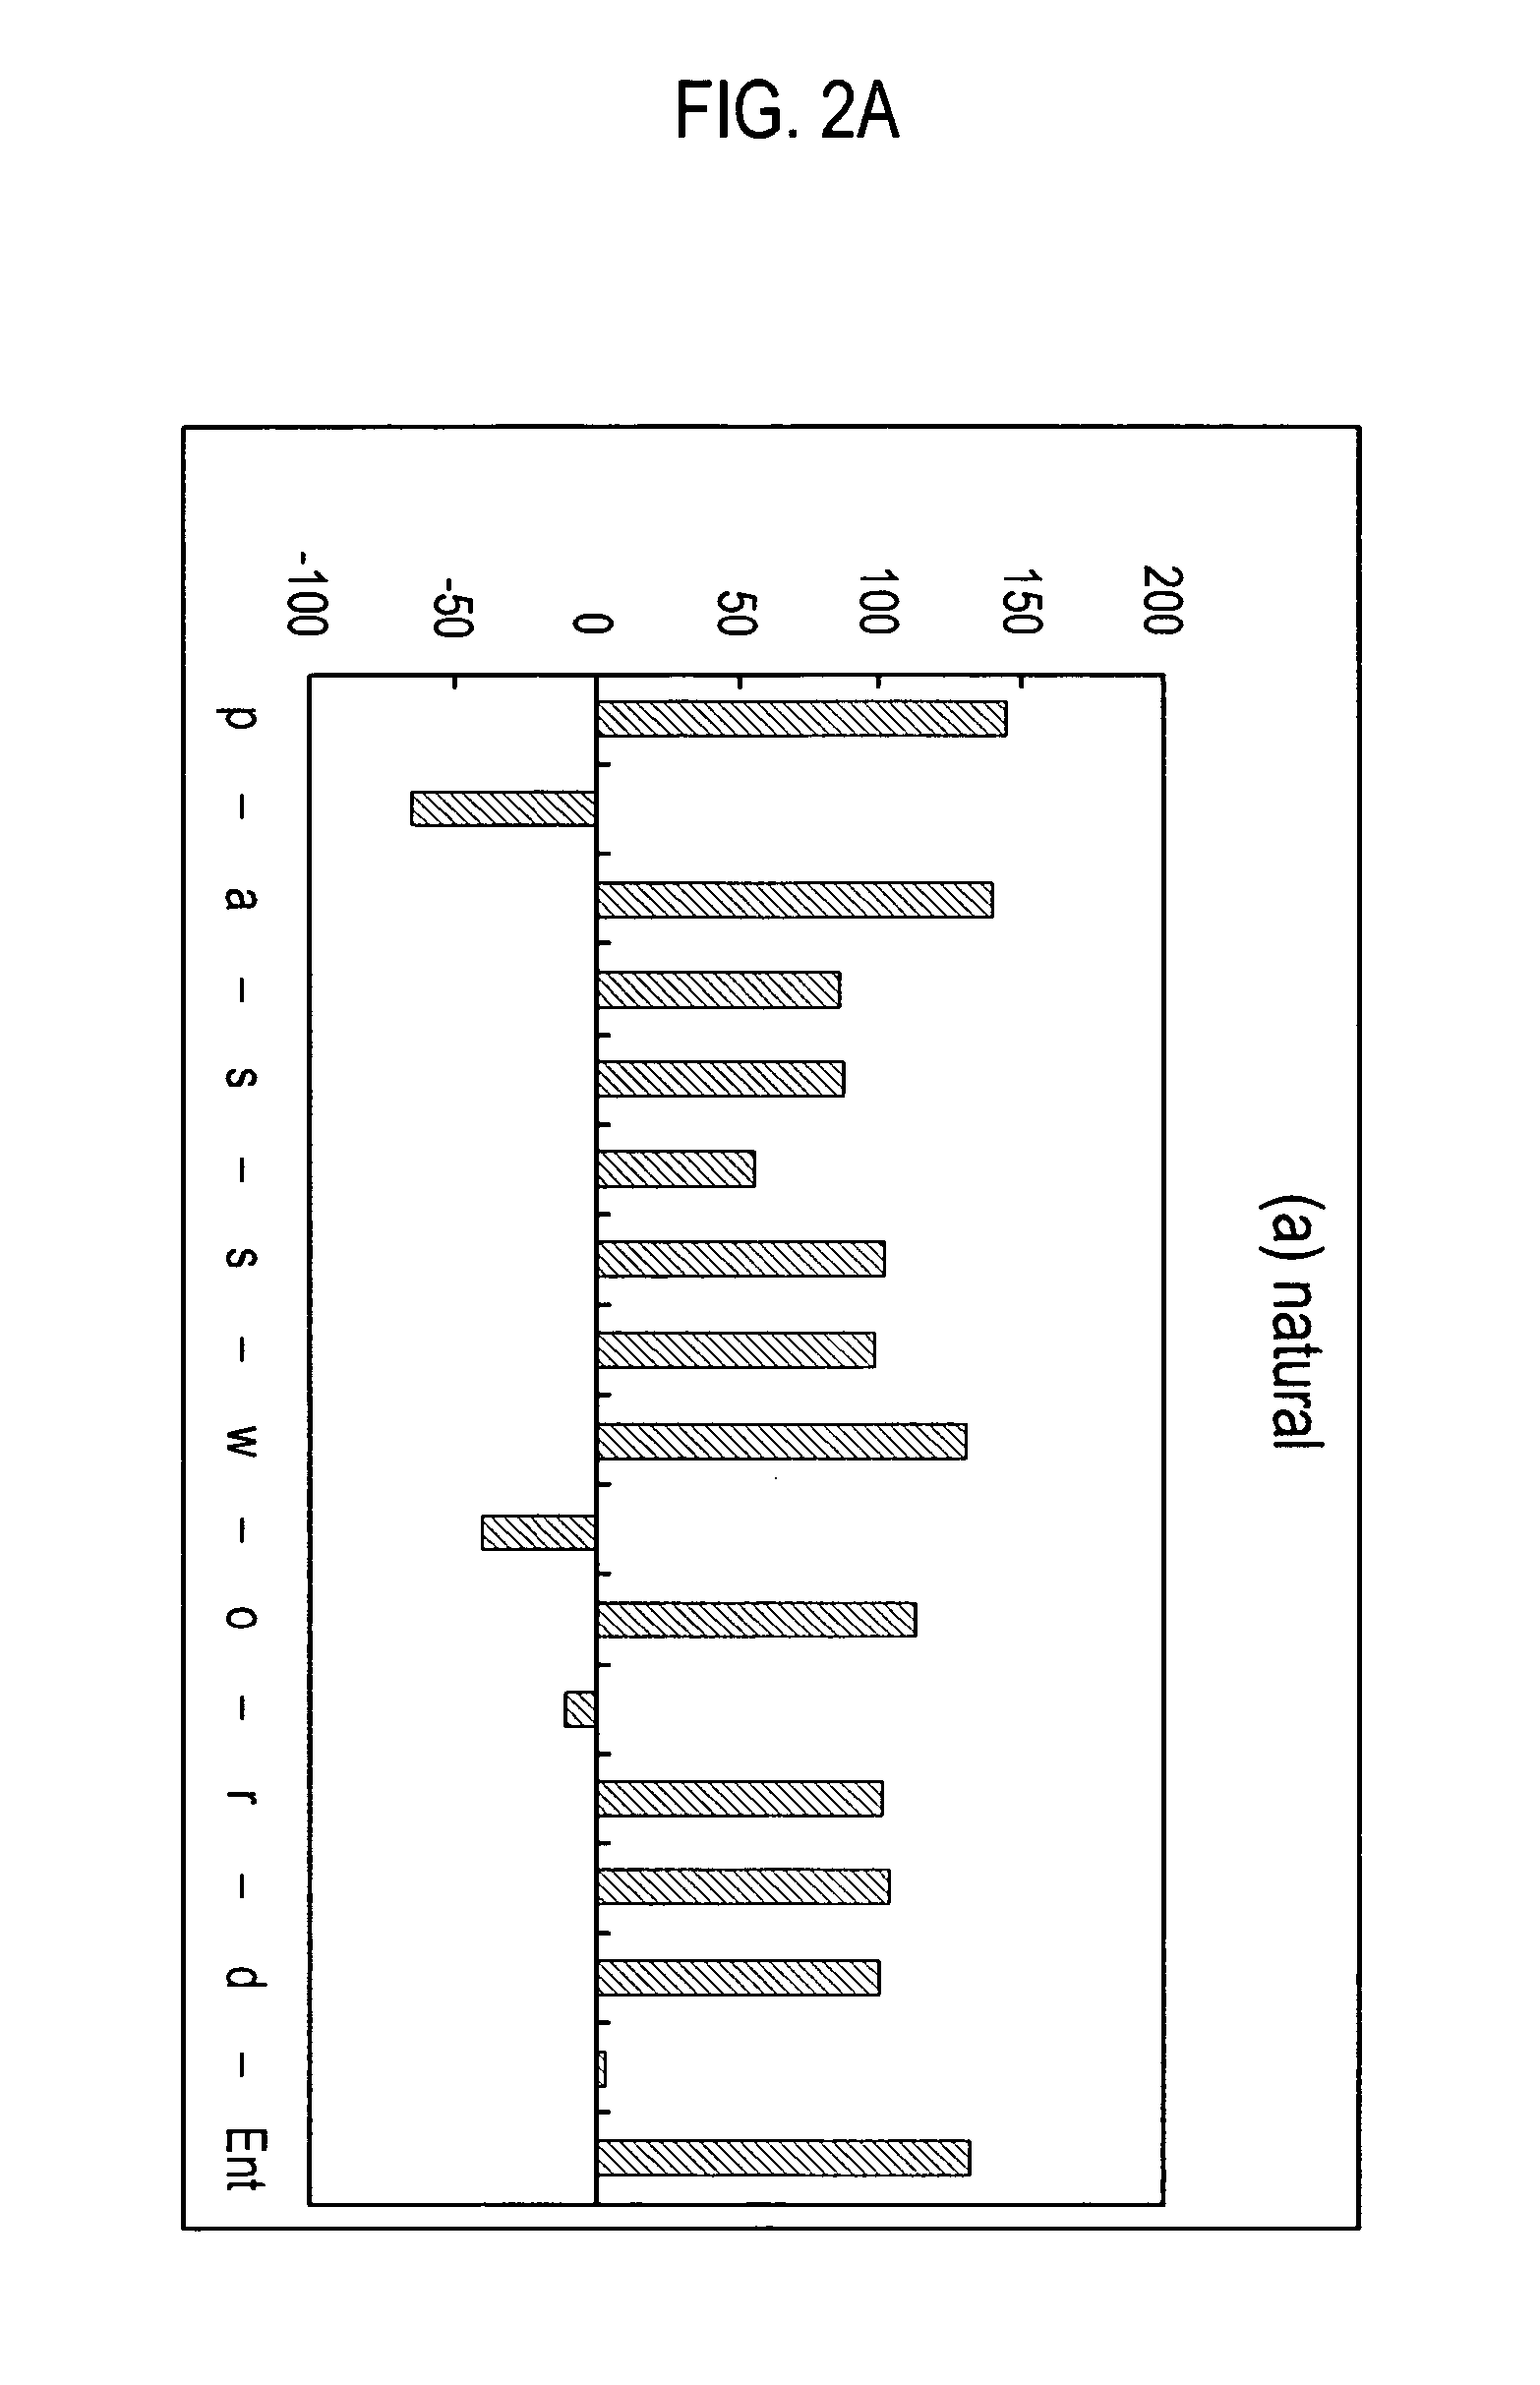 System and method for performing user authentication based on keystroke dynamics